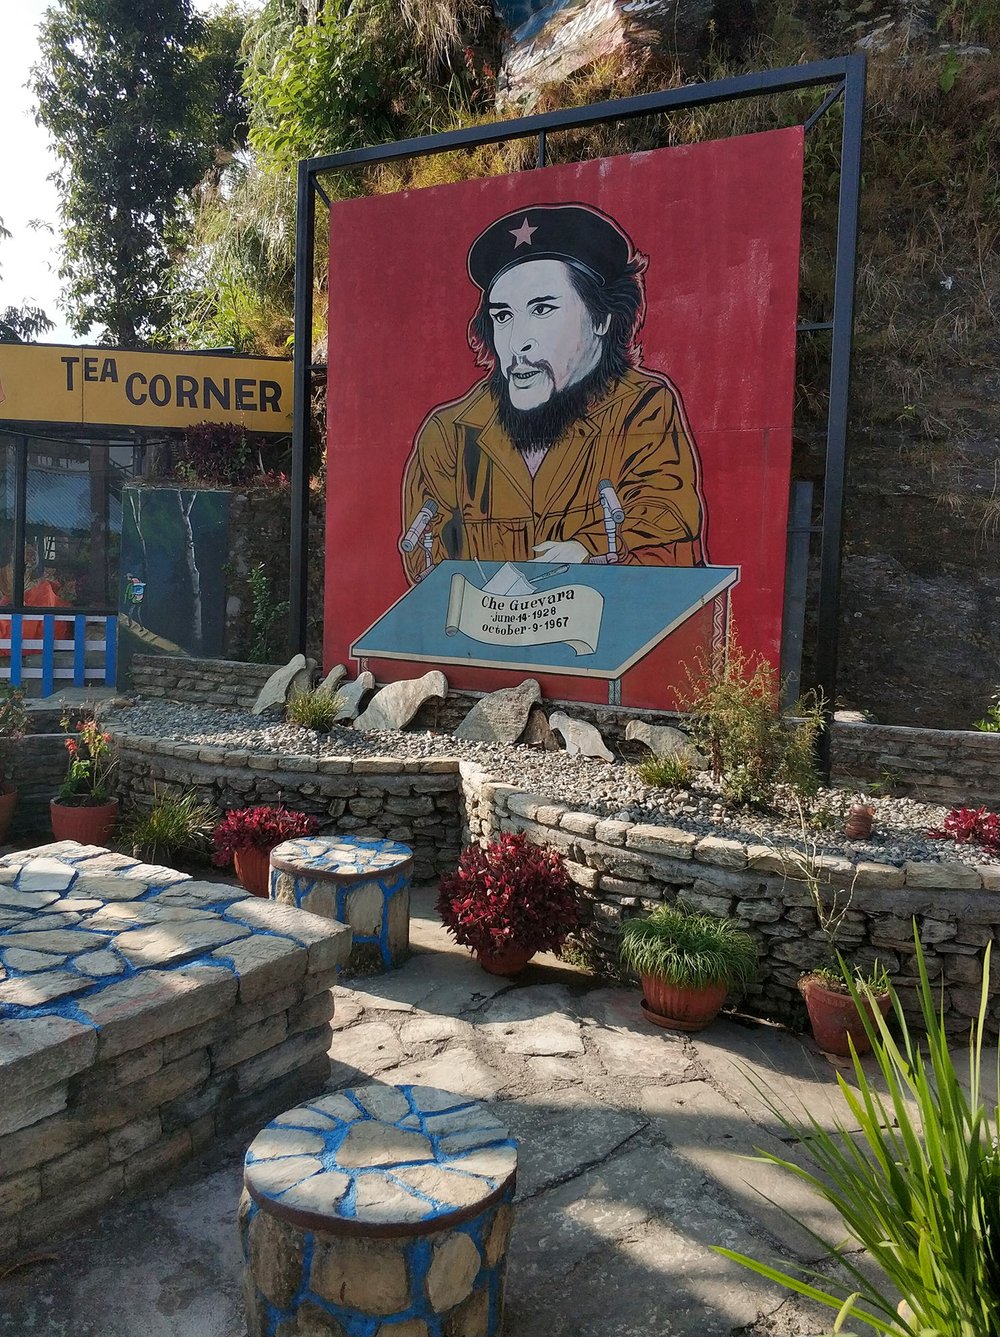  …none other than Che Guevara greeting you for a cup of tea. The irony being that most of the 2hr walk not spent whining to yourself, ended up being an internal monologue cursing the scam that is modern day capitalism. 